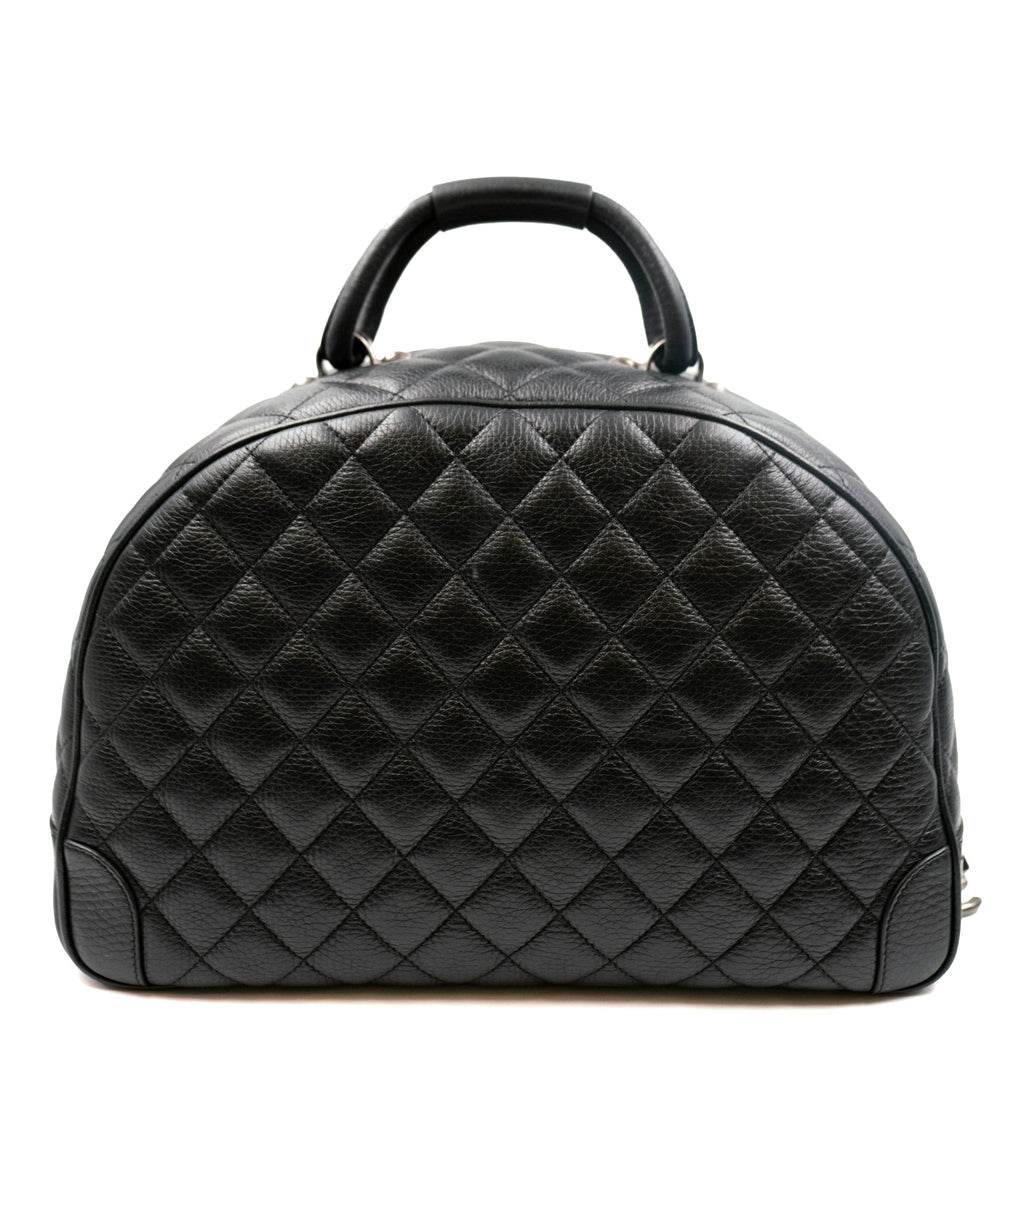 CHANEL Calfskin Quilted Large Airlines Round Trip Bowling Bag Black 536984